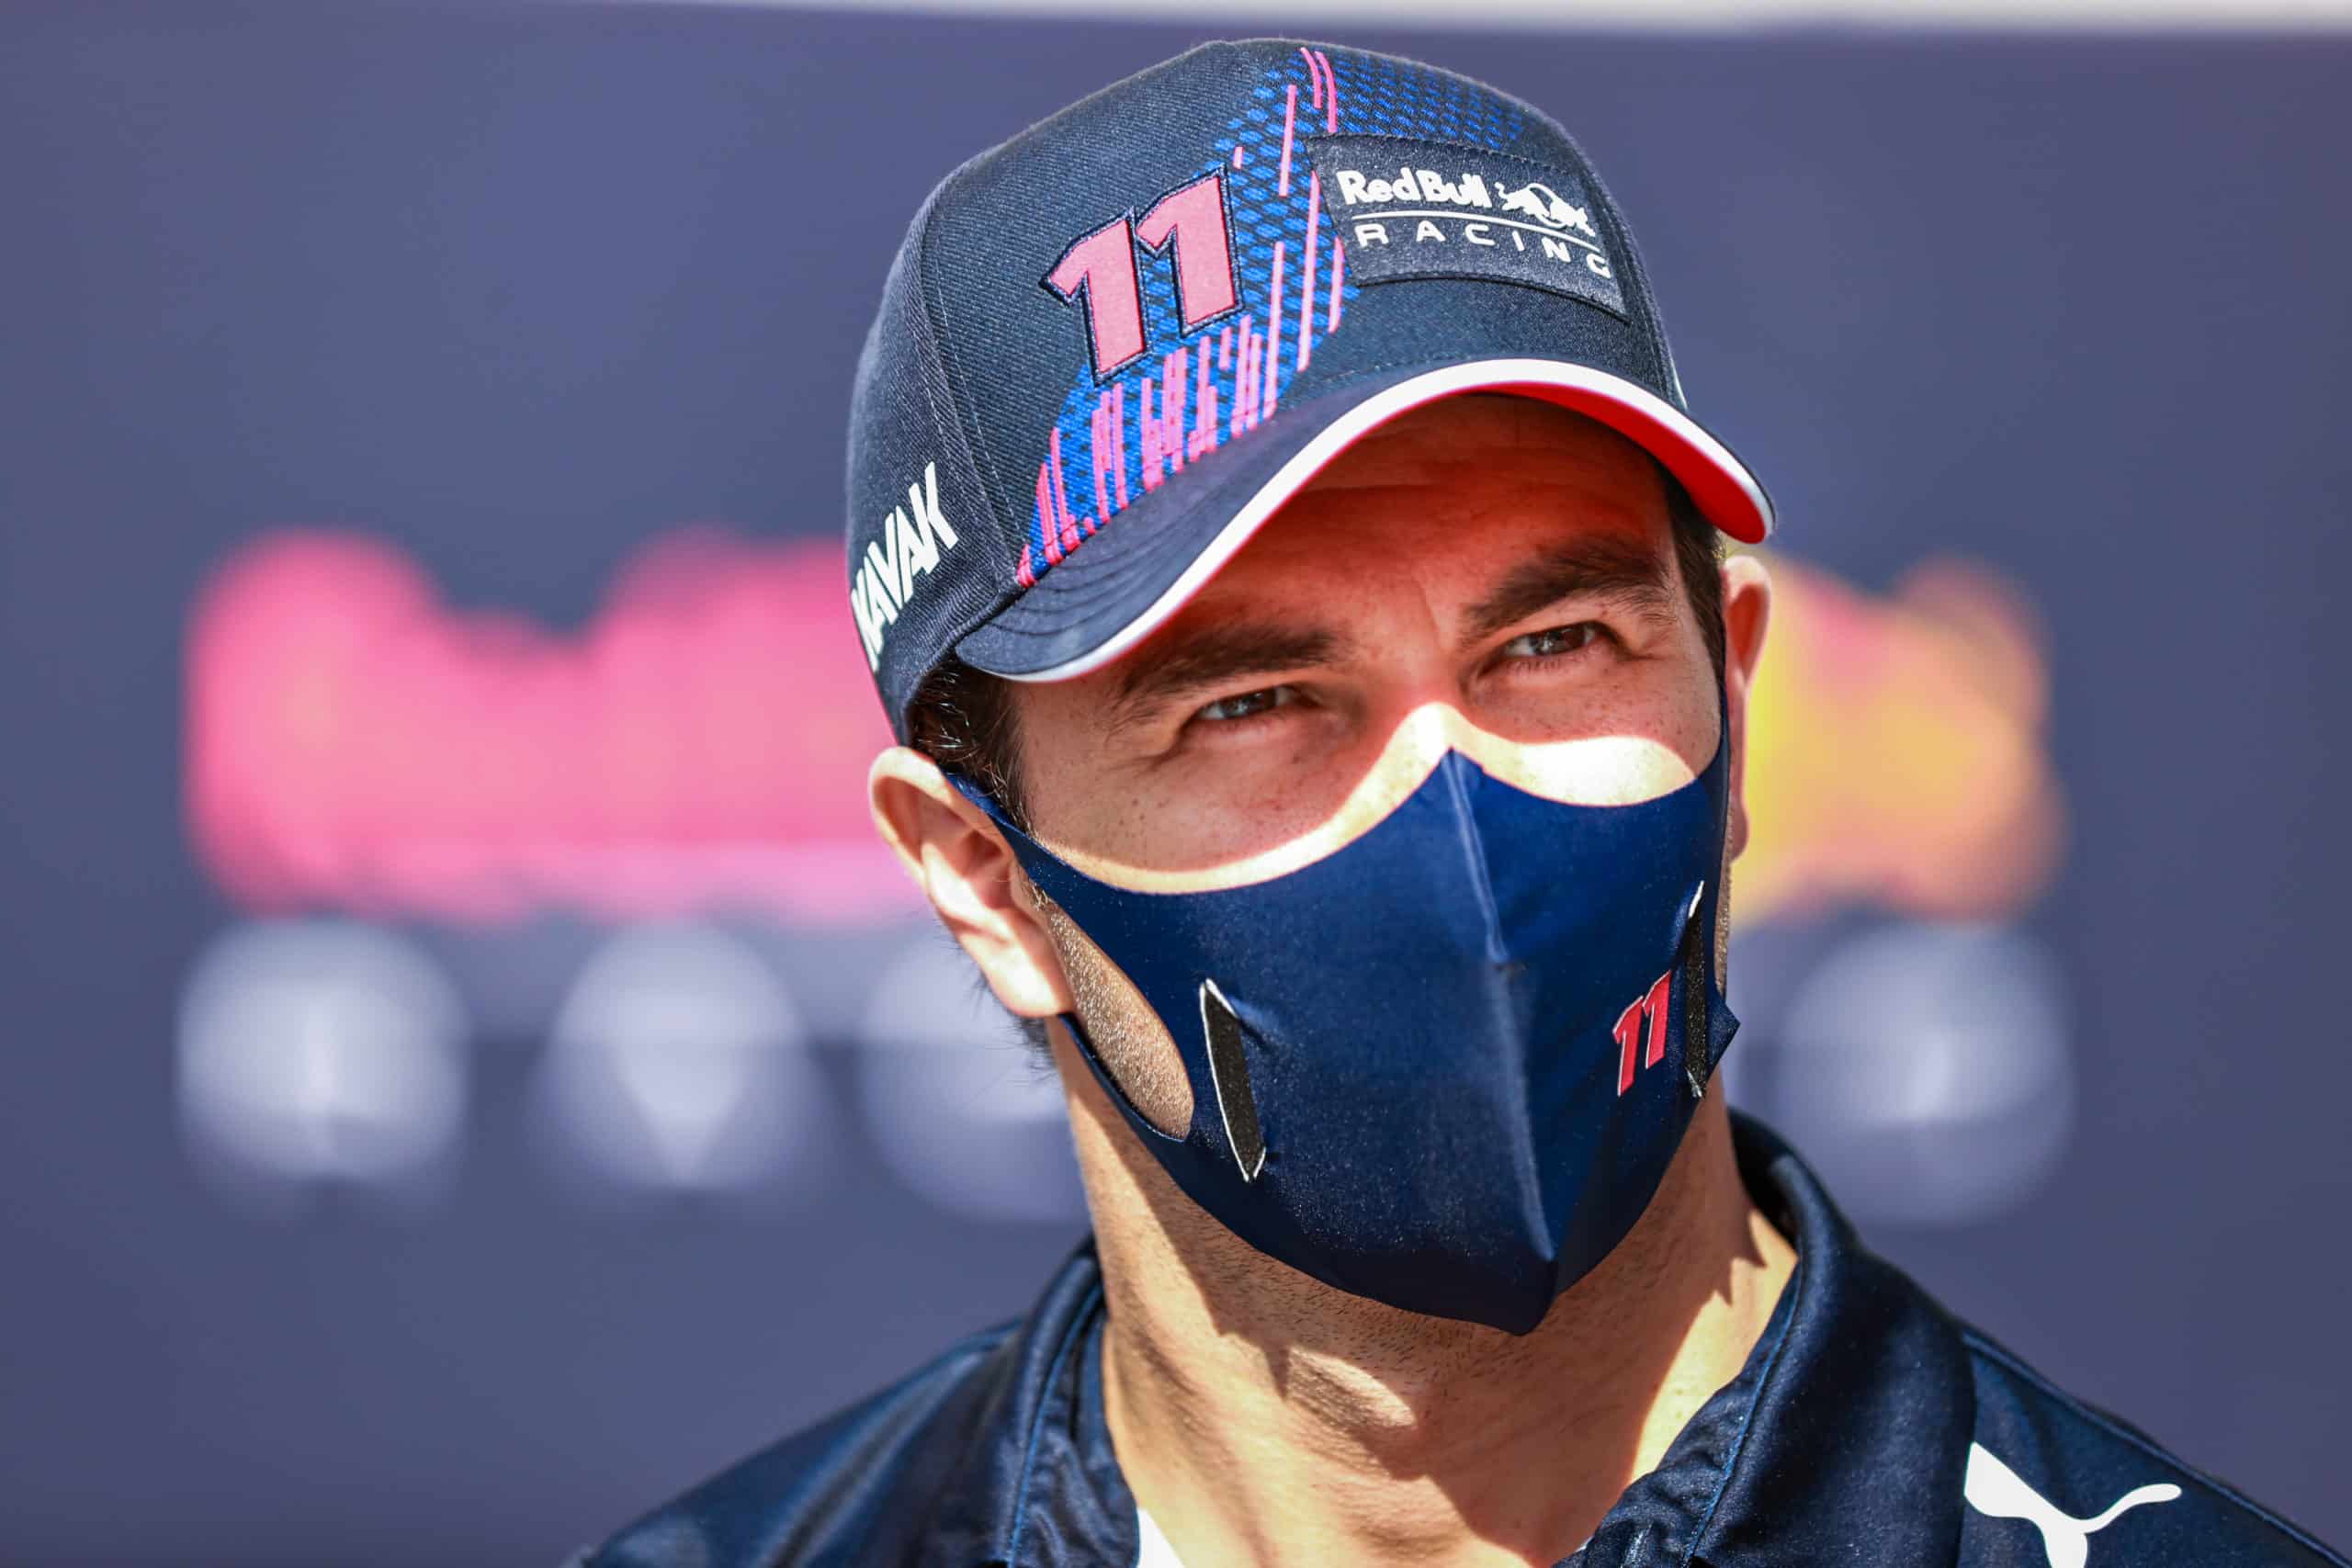 BAKU, AZERBAIJAN - JUNE 03: Sergio Perez of Mexico and Red Bull Racing looks on in the Paddock during previews ahead of the F1 Grand Prix of Azerbaijan at Baku City Circuit on June 03, 2021 in Baku, Azerbaijan. (Photo by Mark Thompson/Getty Images) // Getty Images / Red Bull Content Pool // SI202106030210 // Usage for editorial use only //